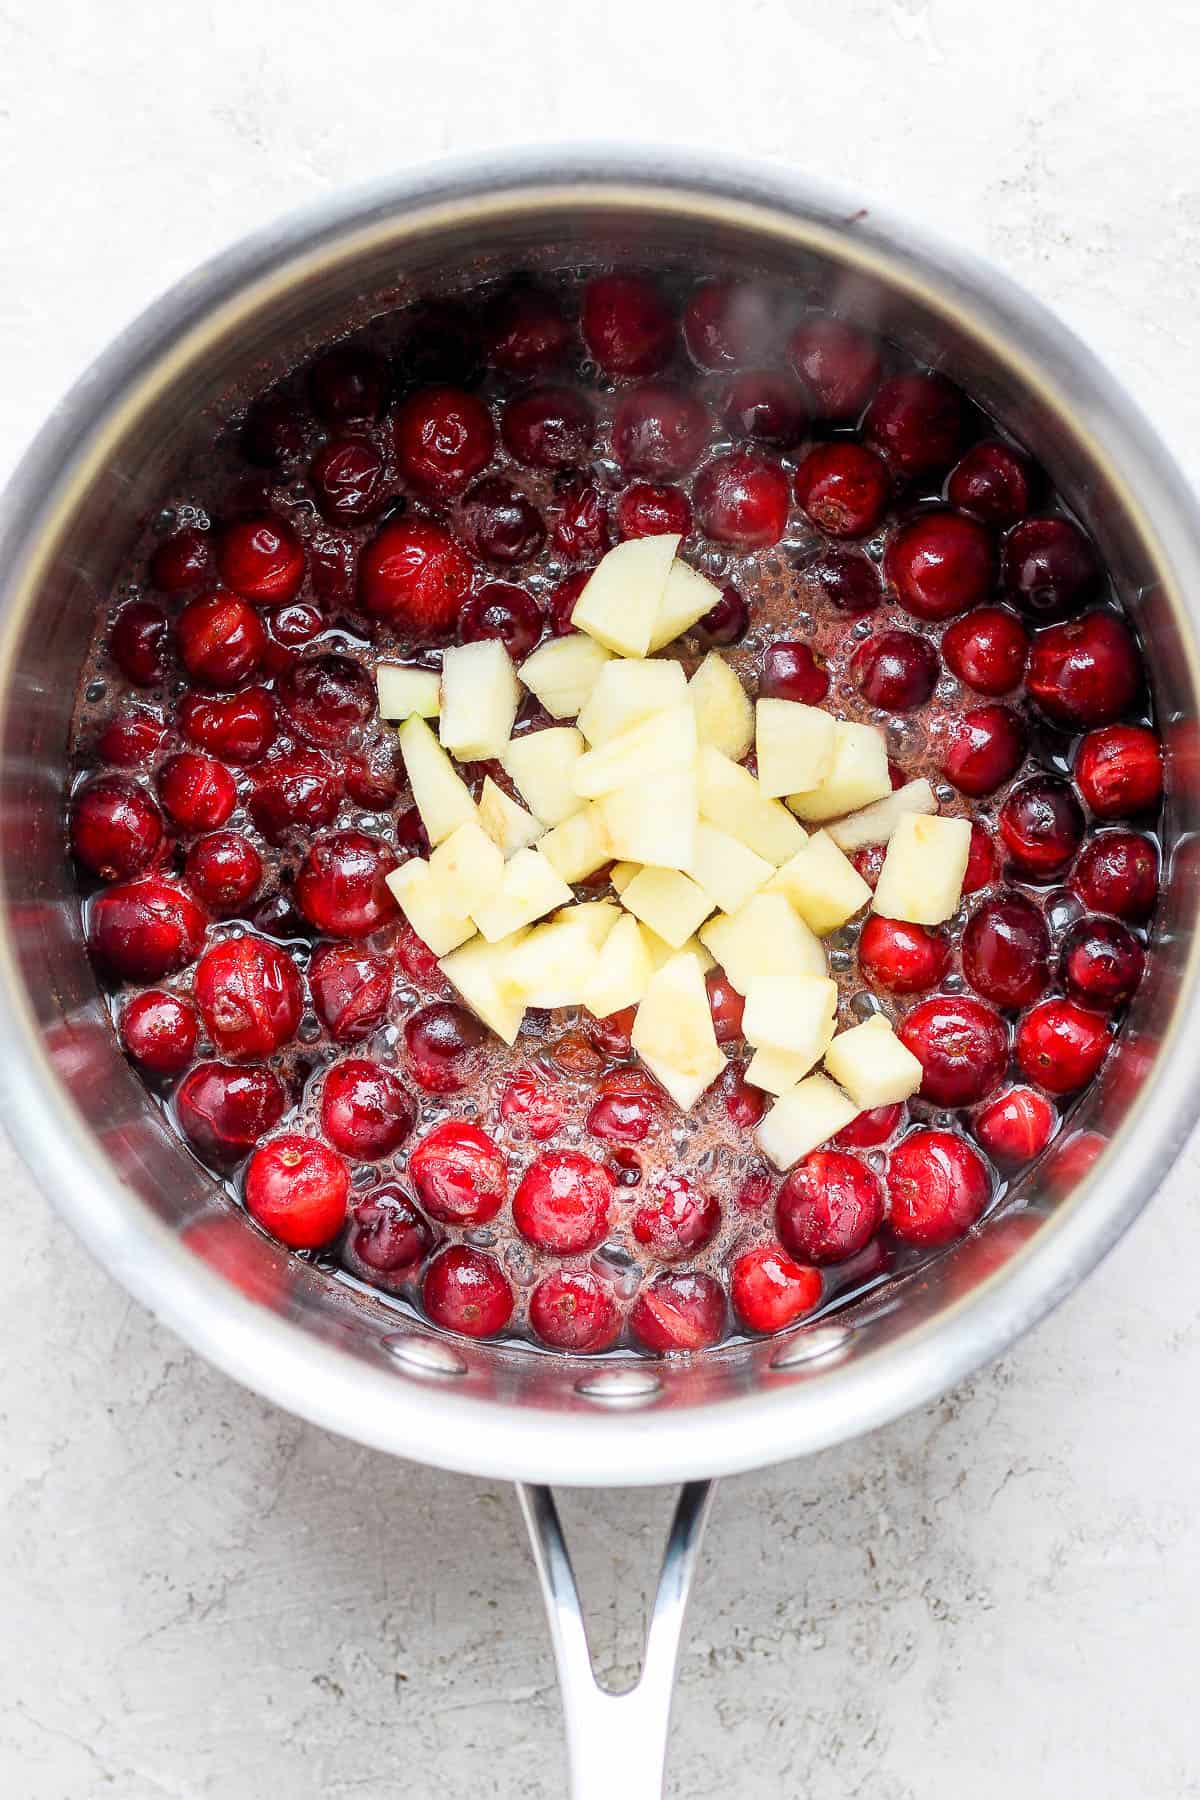 Apples added to apple cranberry sauce in a saucepan.